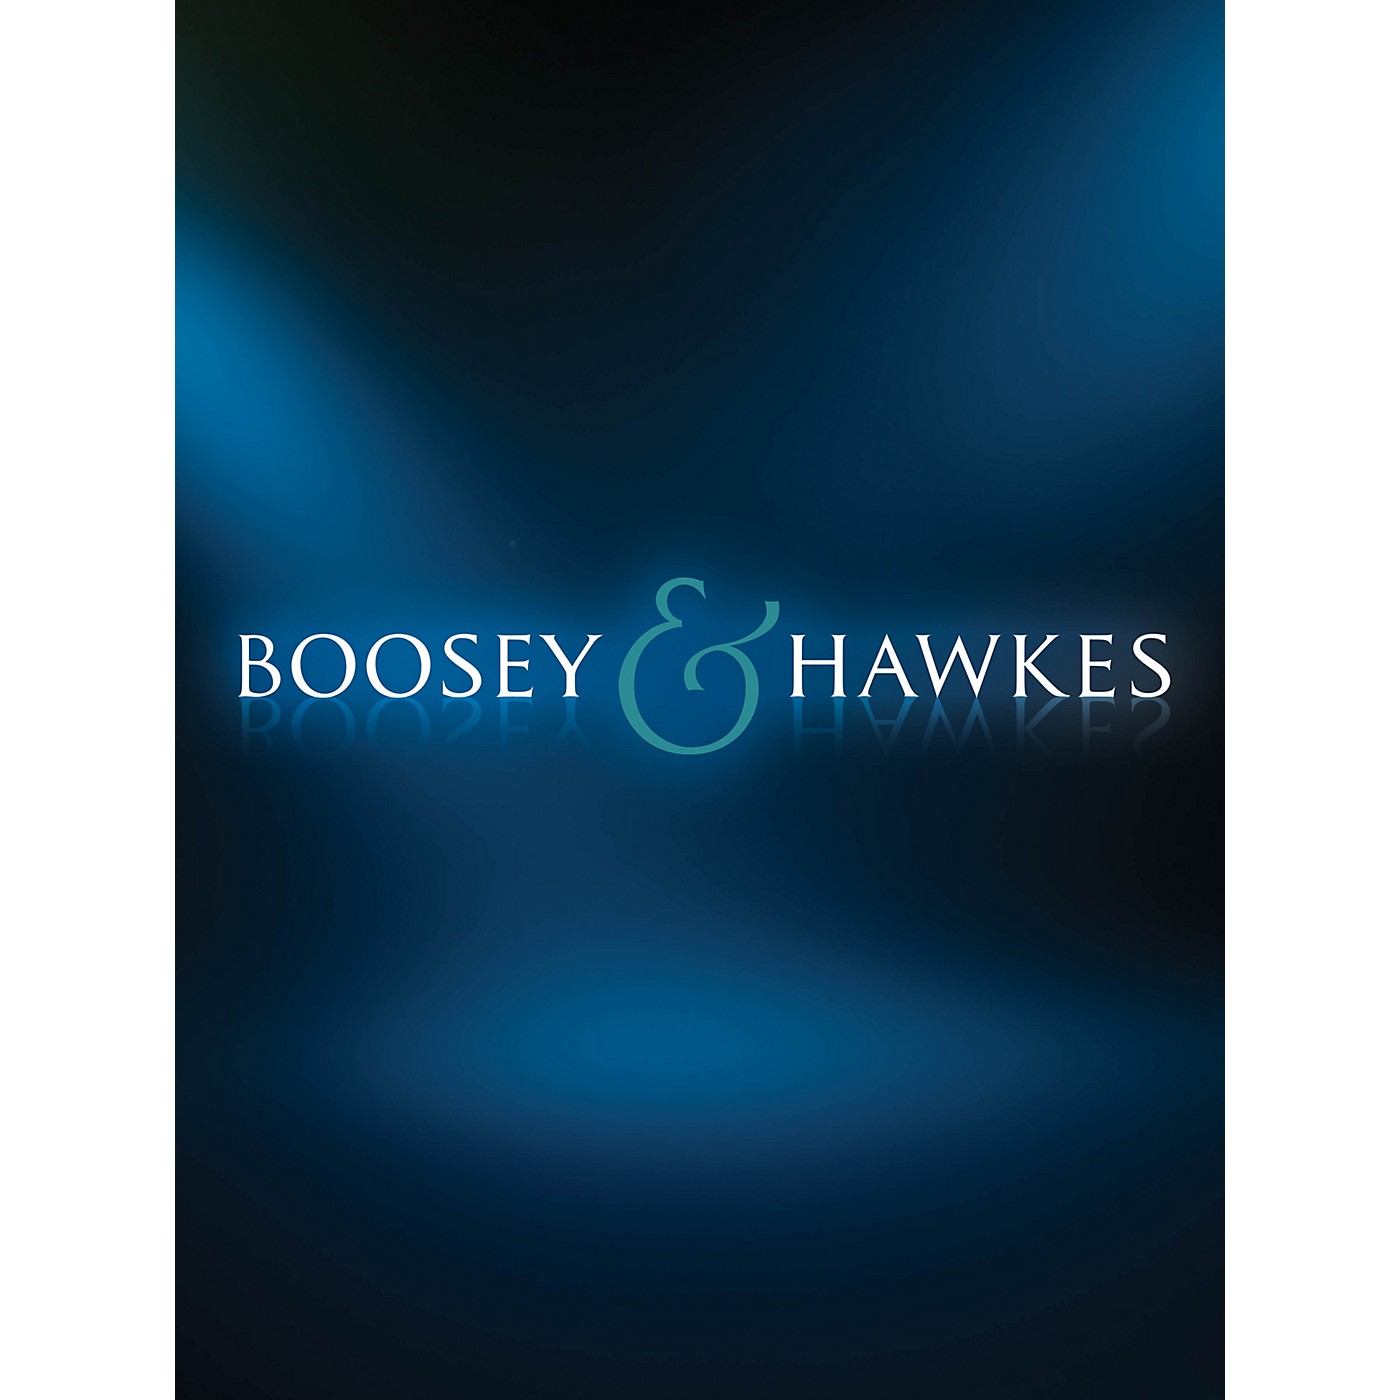 Boosey and Hawkes 'Round Midnight (Score and Parts) Jazz Band Composed by Cootie Williams thumbnail